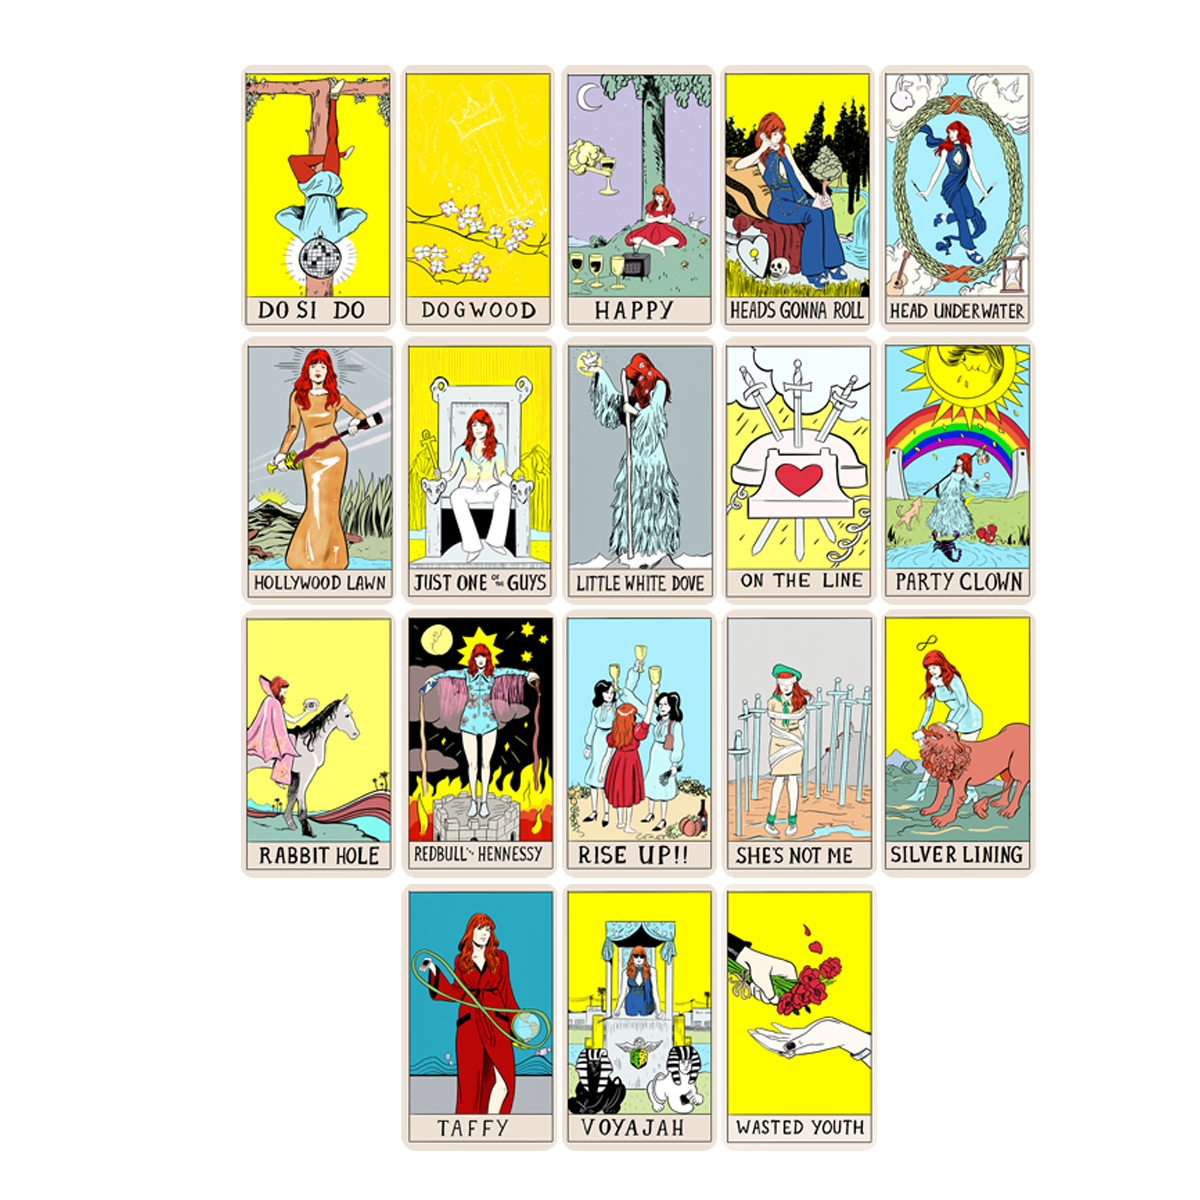 How to Read Tarot Cards: Tarot Cards for Beginners - HelloGiggles